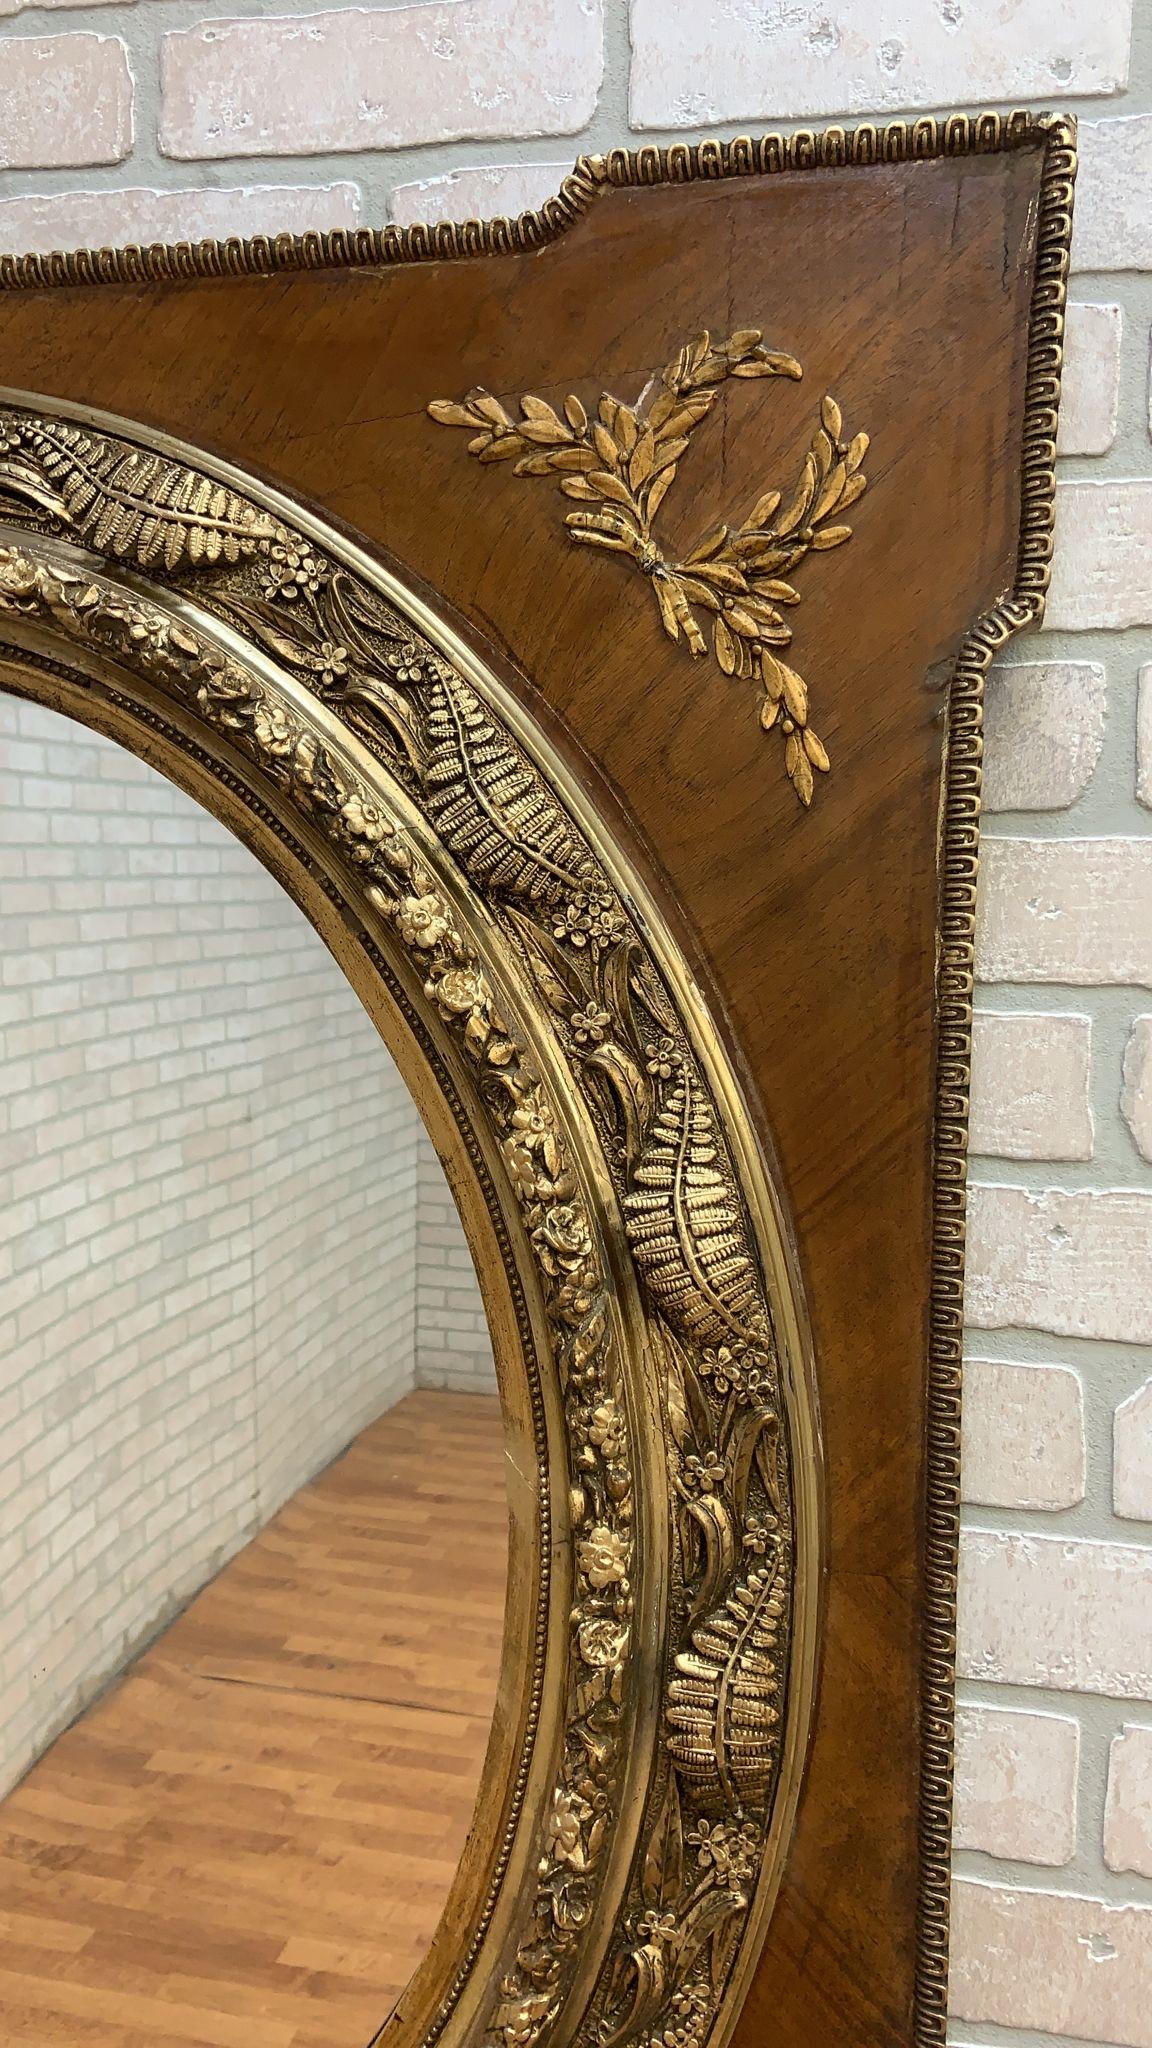 Antique Large French Napoleon III Caved Gold Gilded Wood Medallion Wall Mirror

The Antique Large French Napoleon III Carved Gold Gilded Wood Medallion Wall Mirror is a magnificent testament to the opulence and craftsmanship of the Napoleon III era.